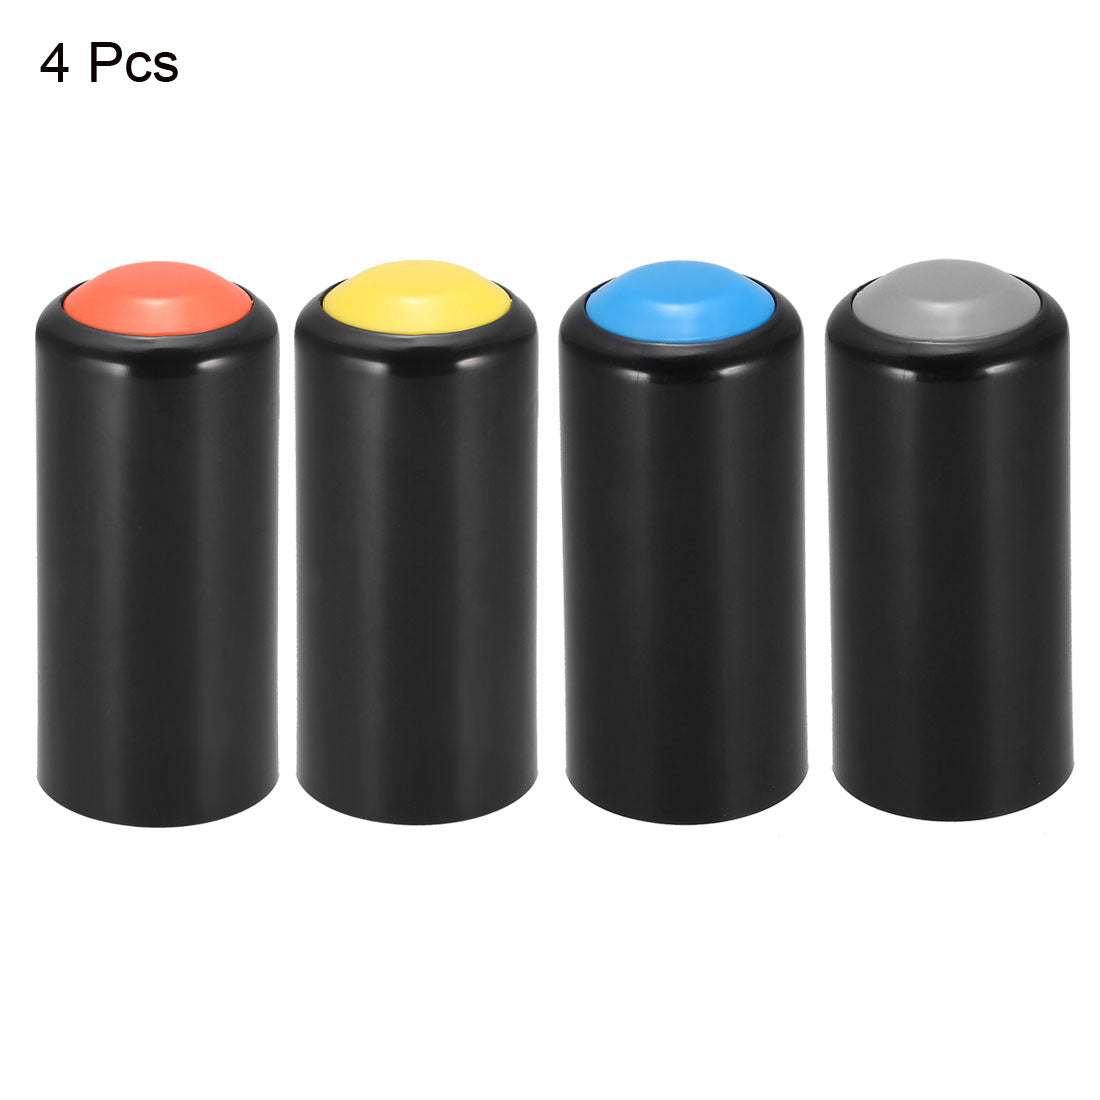 uxcell Uxcell Battery Cover Mic Battery Screw on Cap Cup Cover for PGX24 SLX24 PG58 BETA58 4 Colors 4Pcs